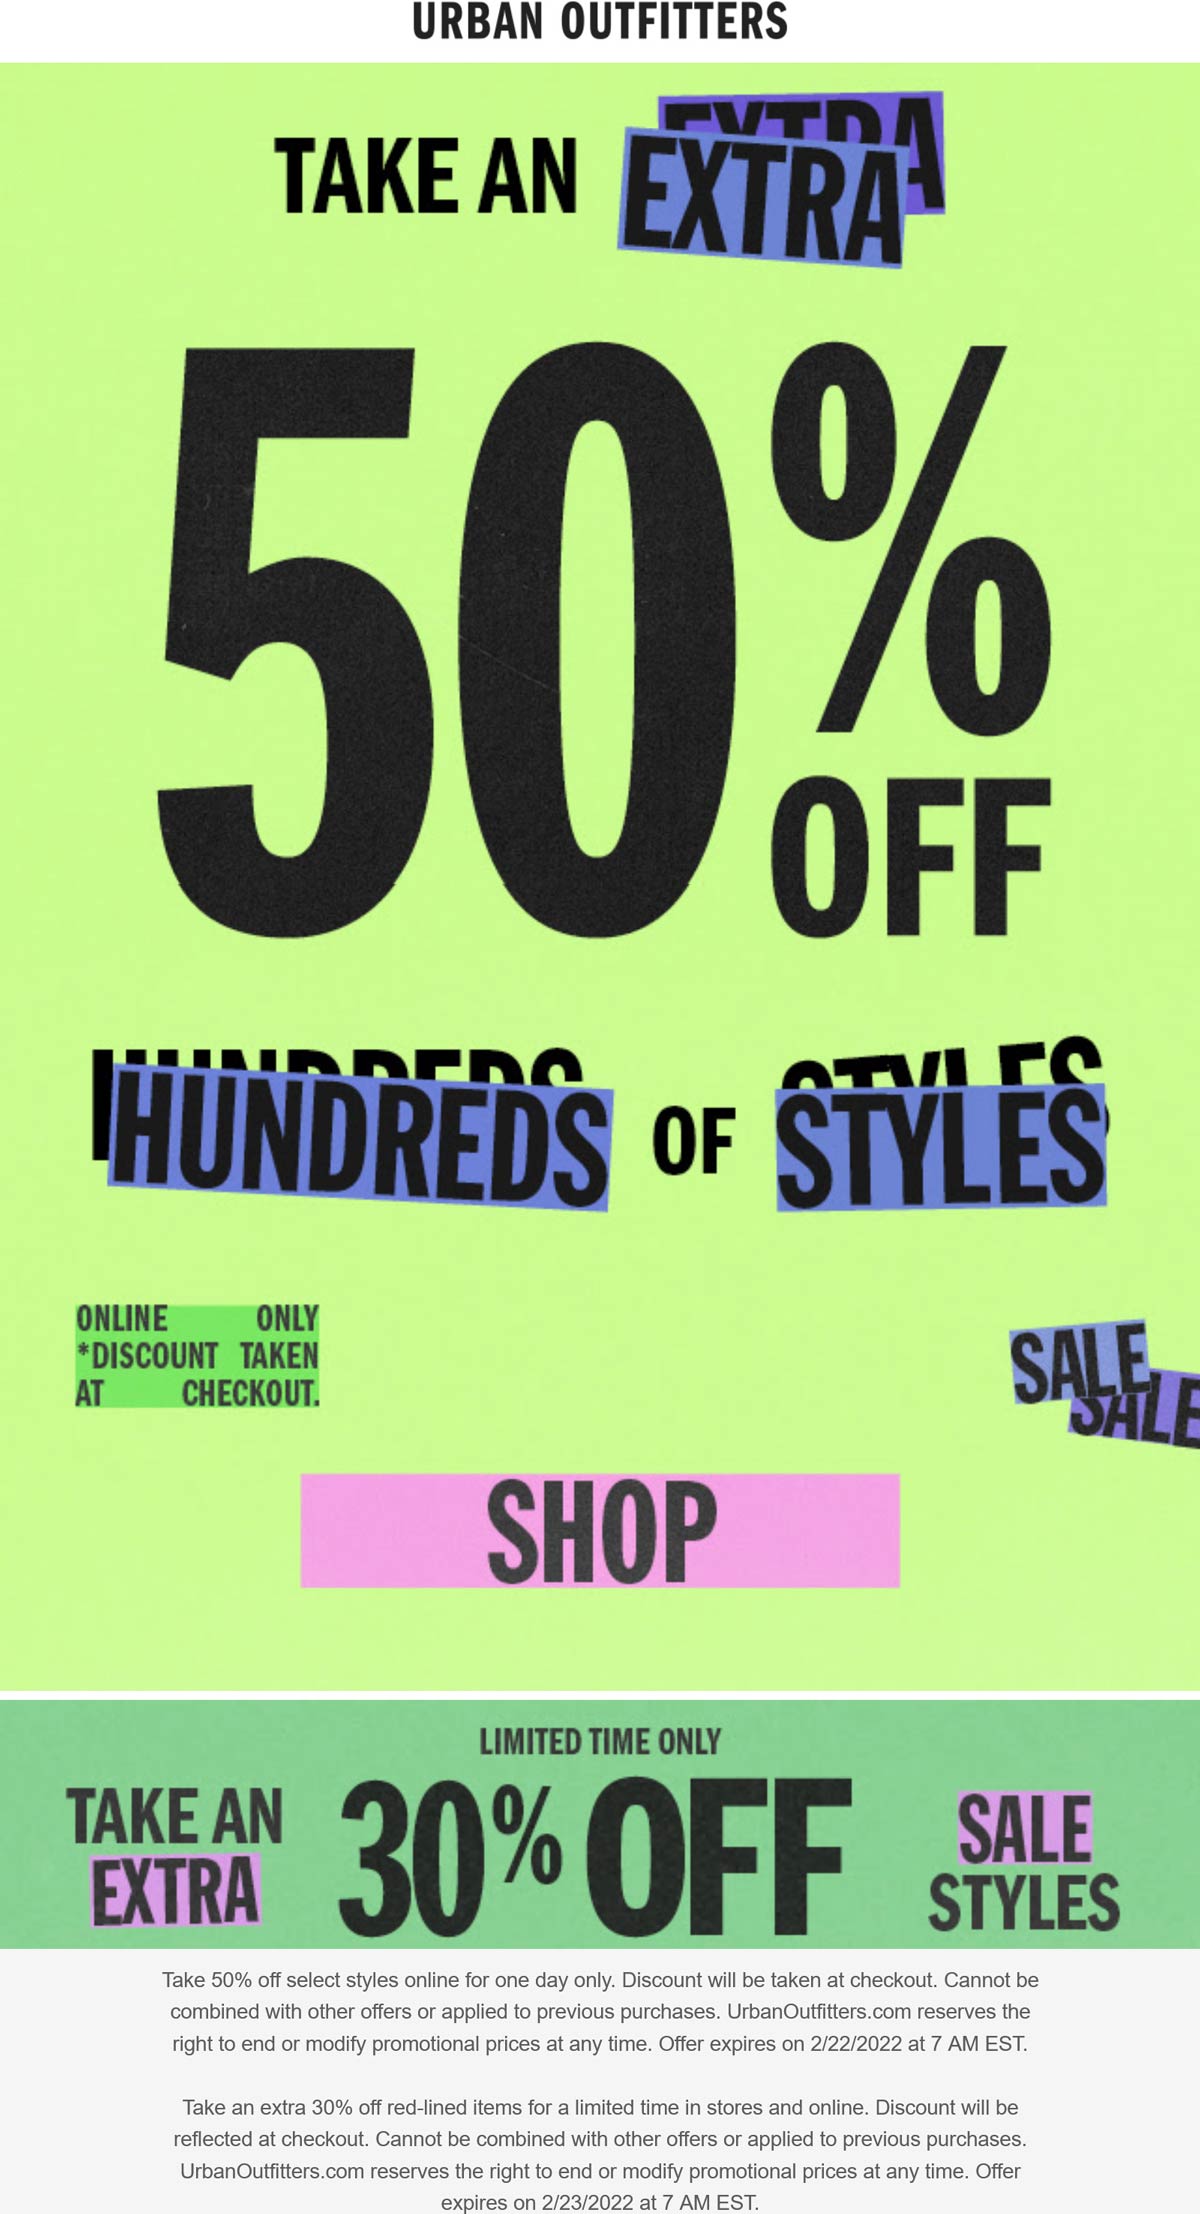 Urban Outfitters stores Coupon  Extra 30-50% off today at Urban Outfitters #urbanoutfitters 